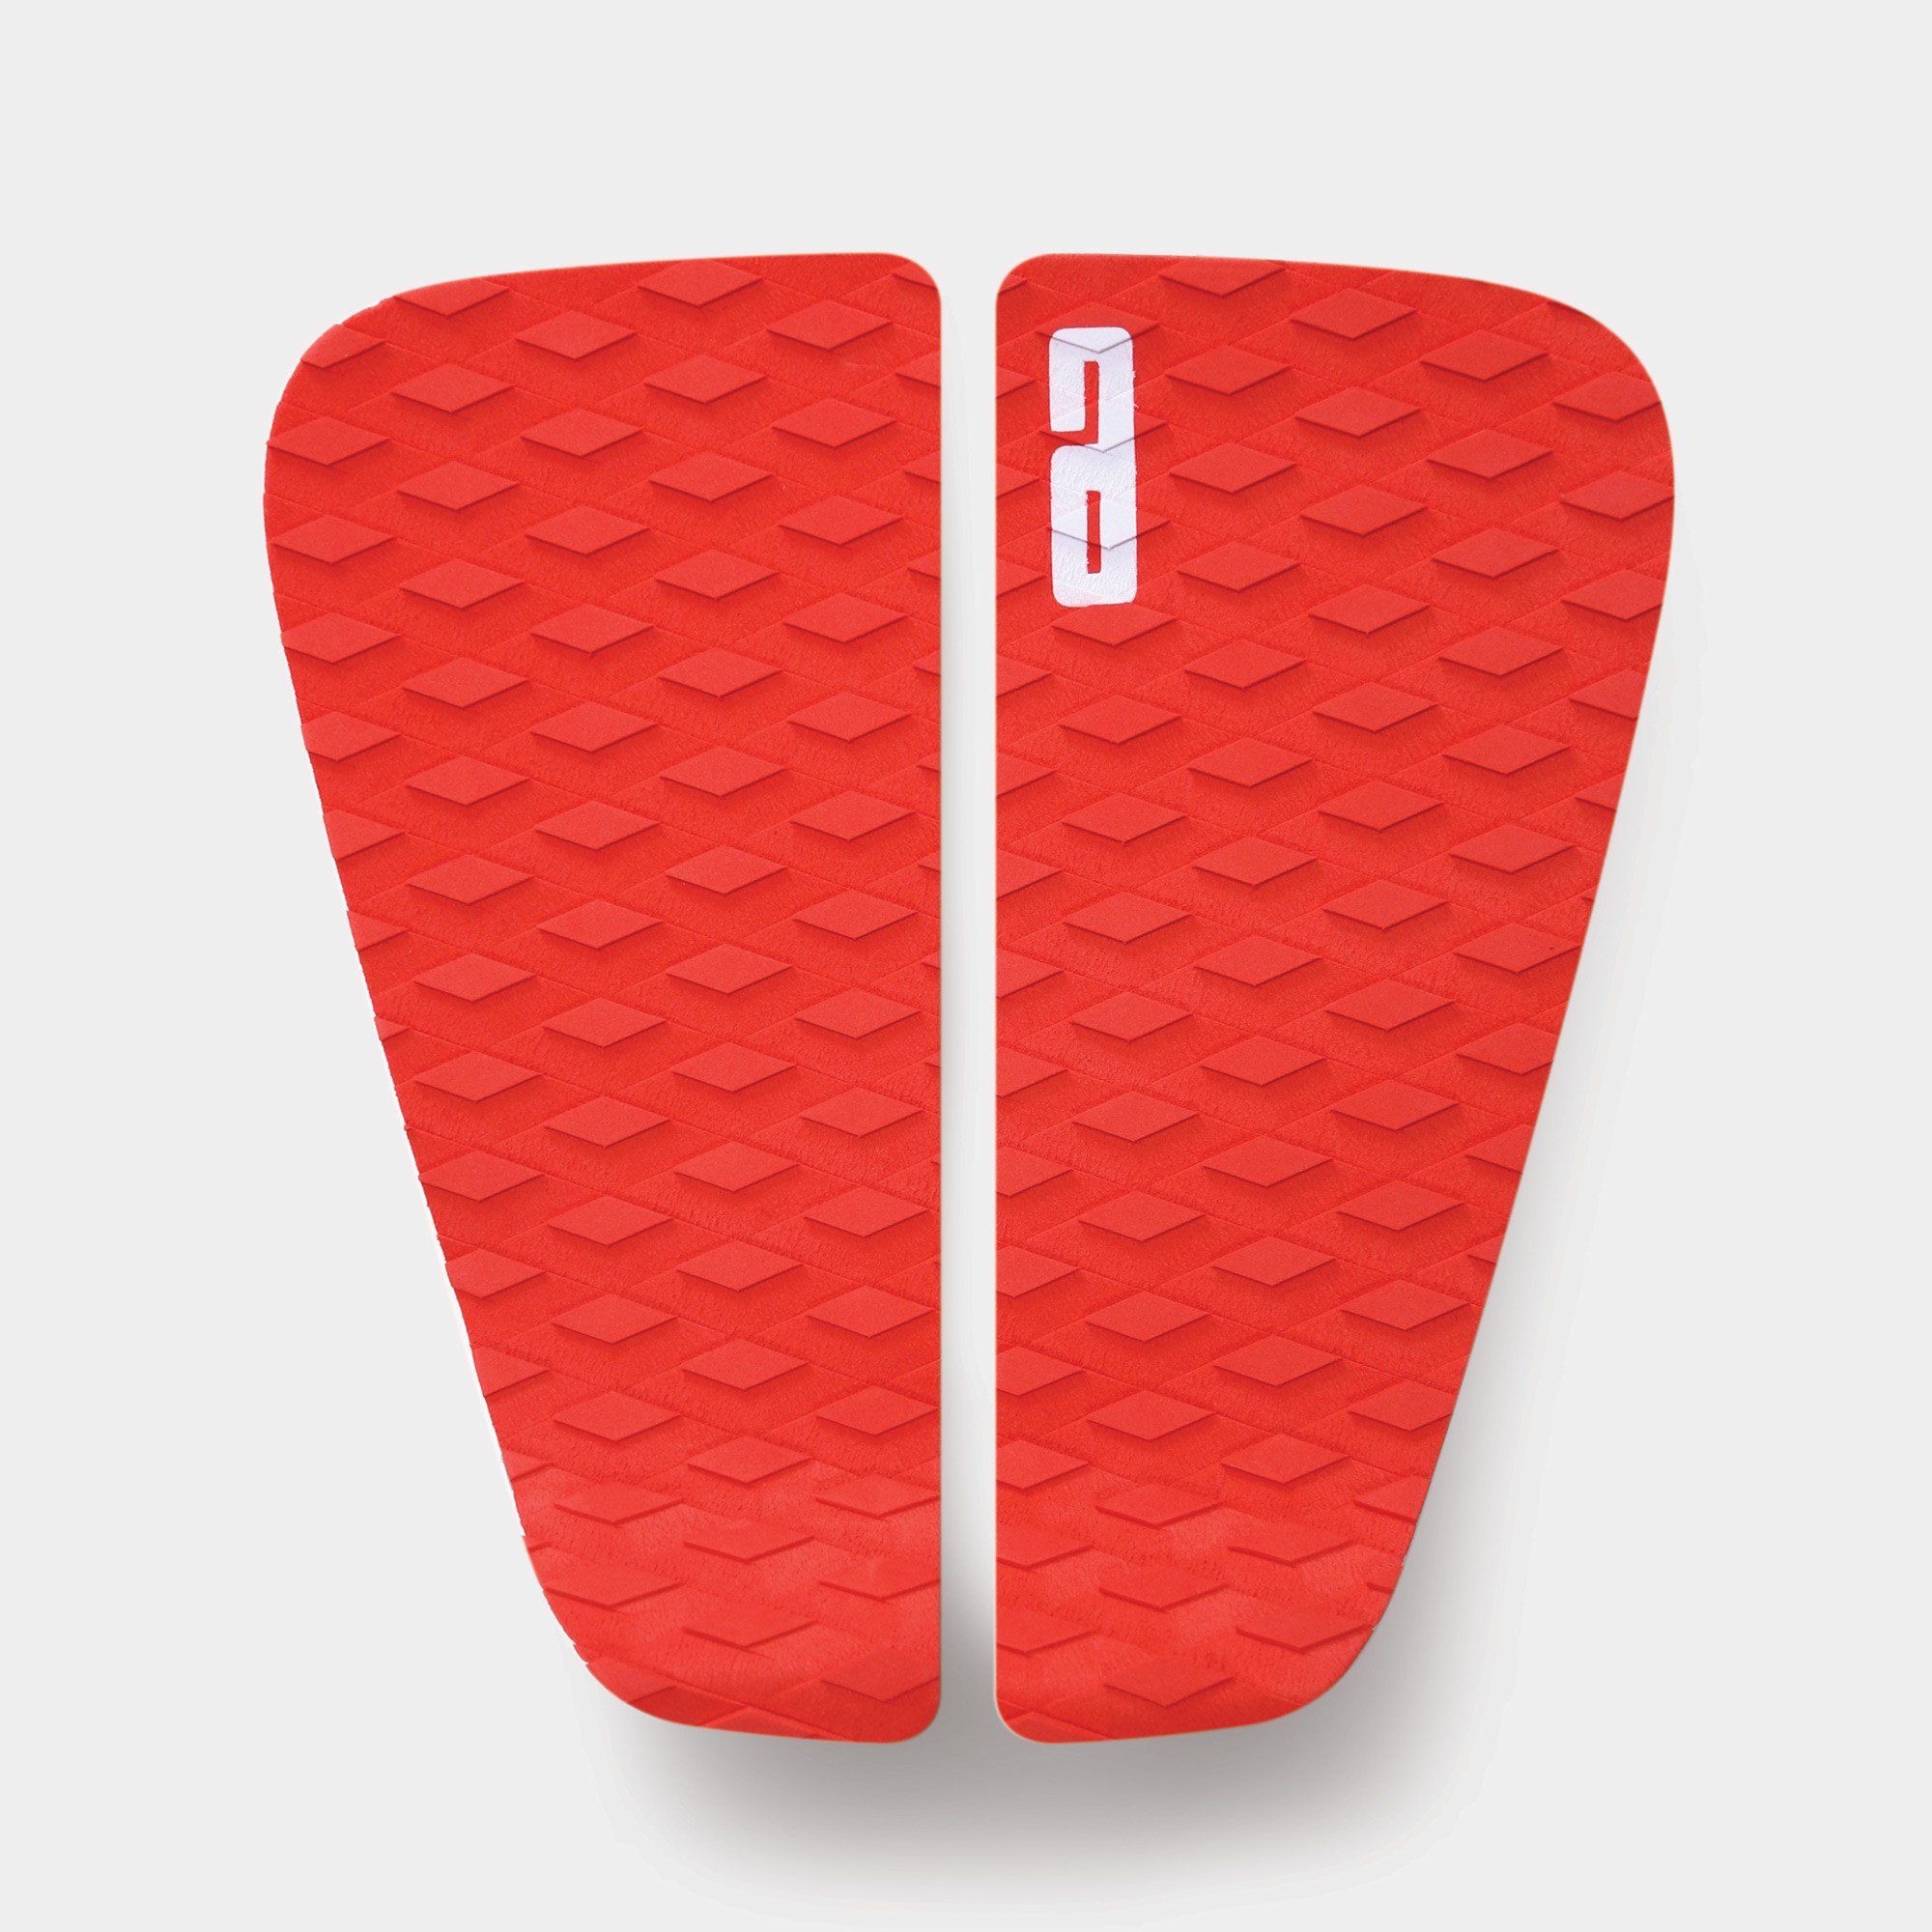 Awesome Colors Traction Pad